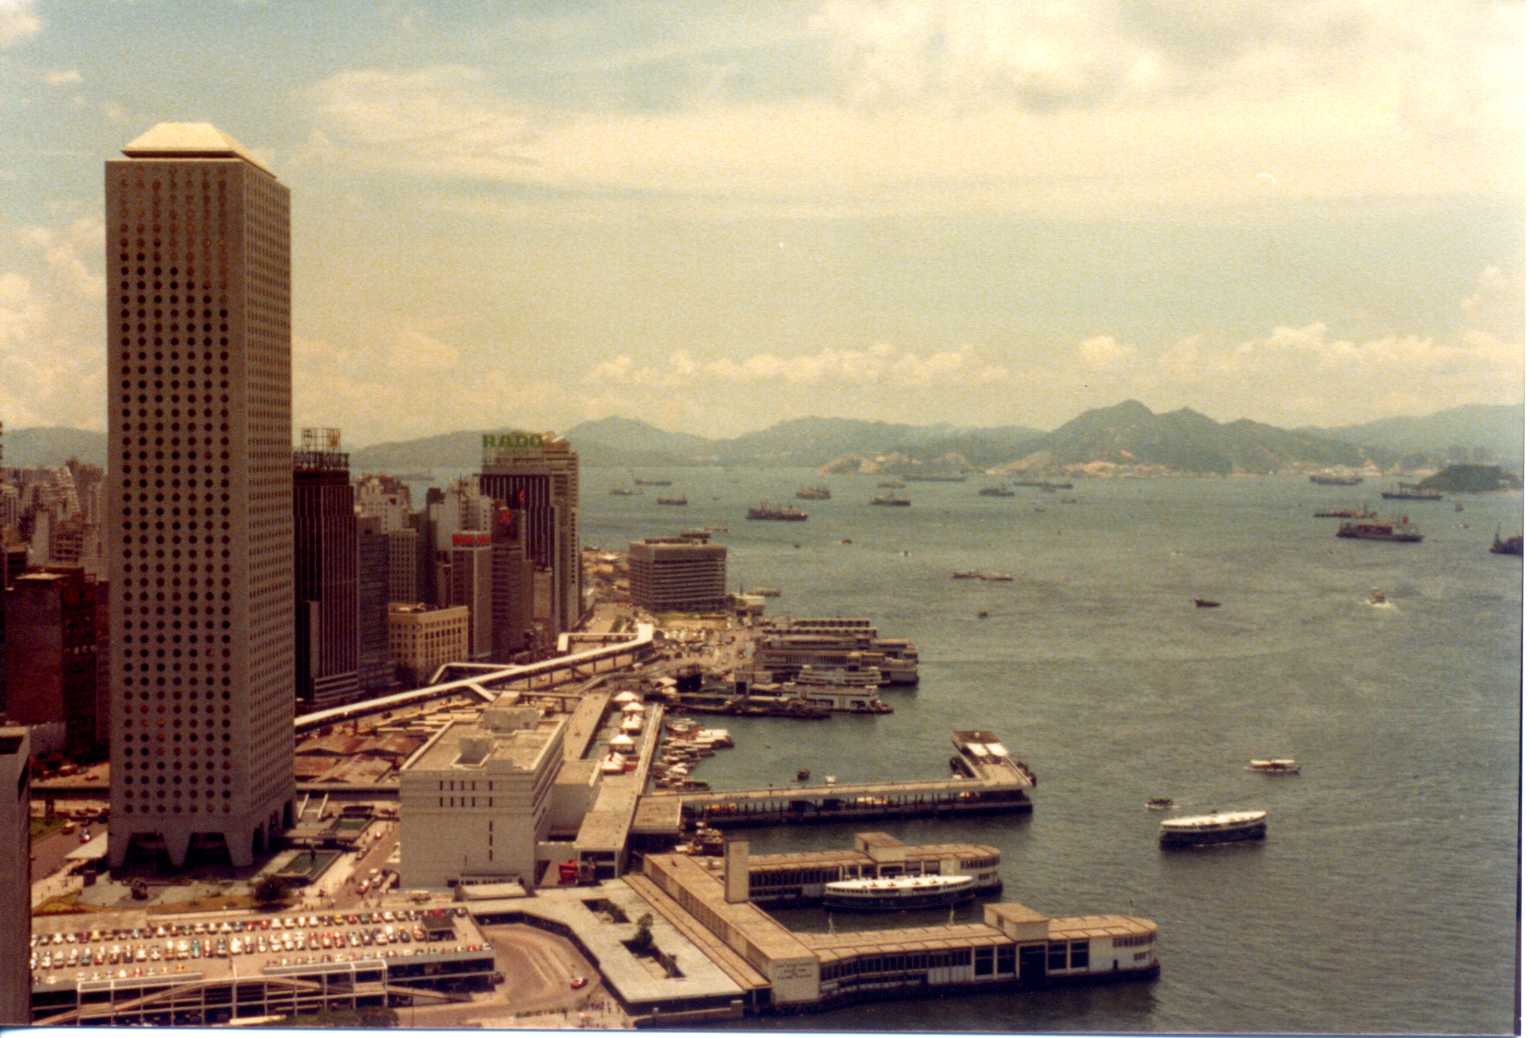 House of a Thousand Arseholes taken from wardroom of HMS TAMAR (overlooking Star Ferry terminus)